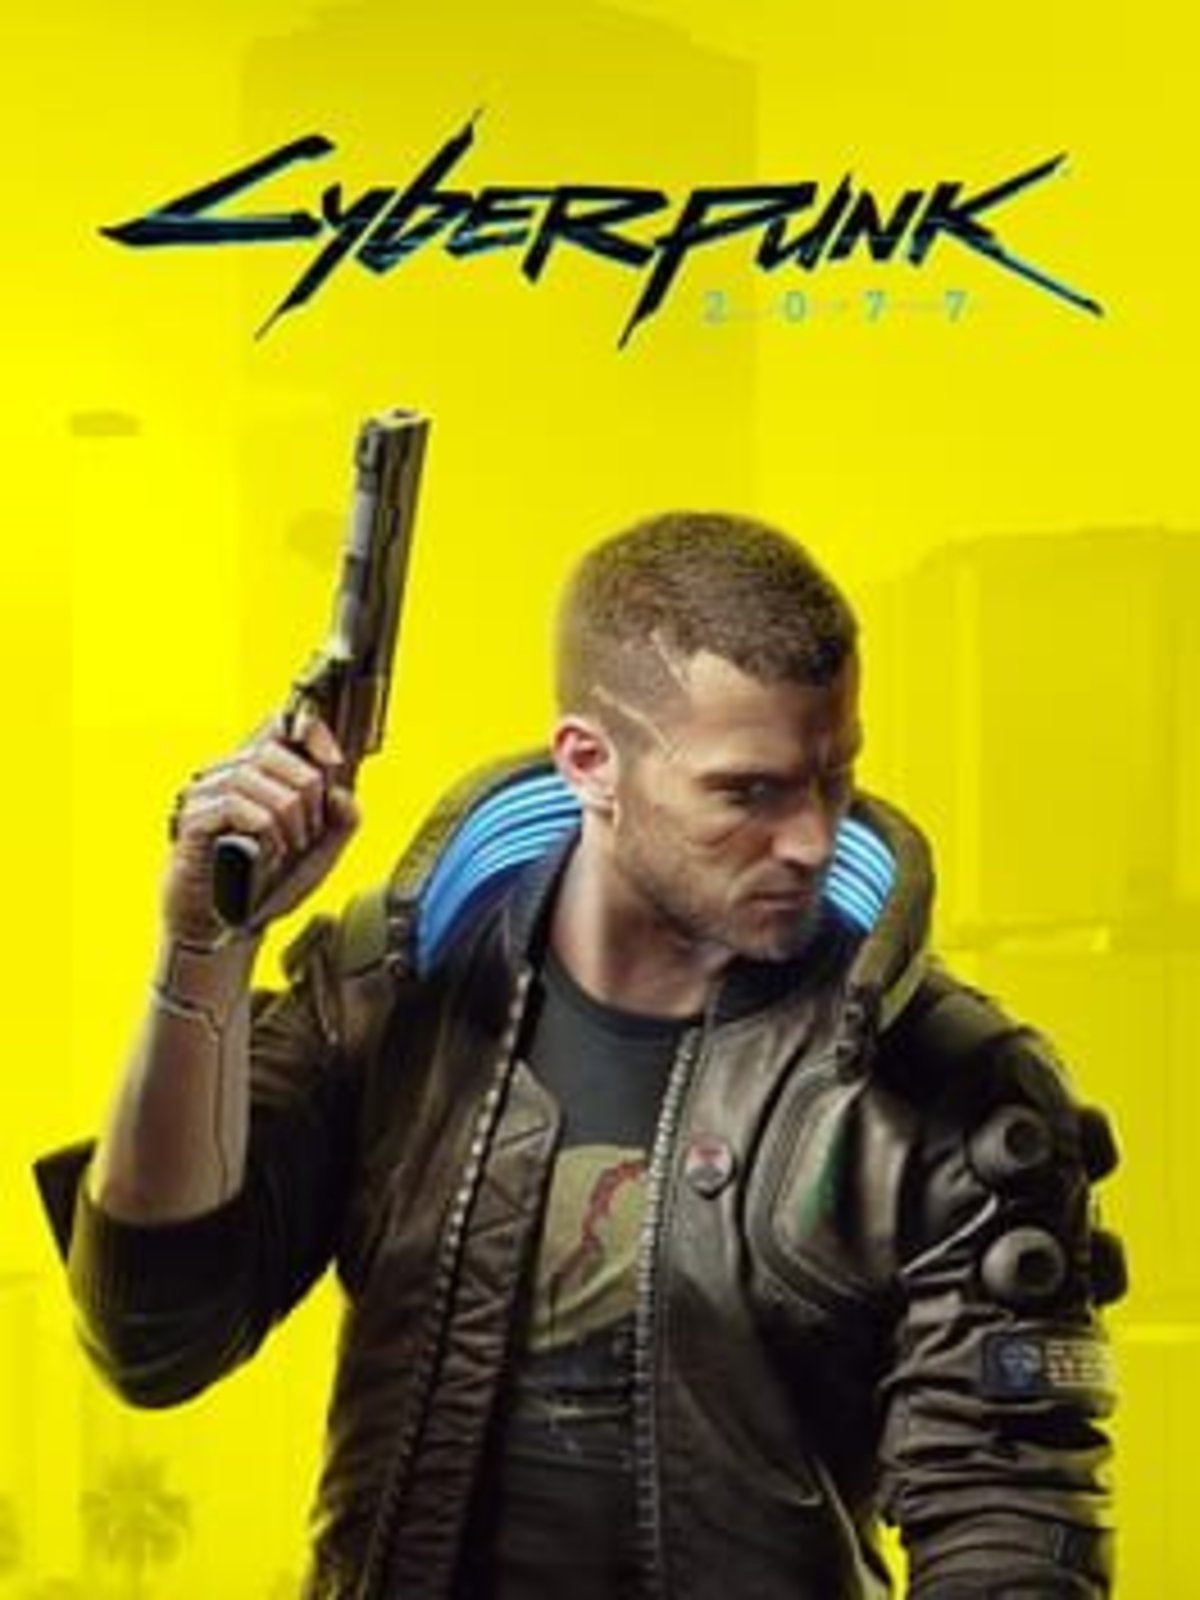 Cyberpunk 2077 aims to have two expansions and its multiplayer continues